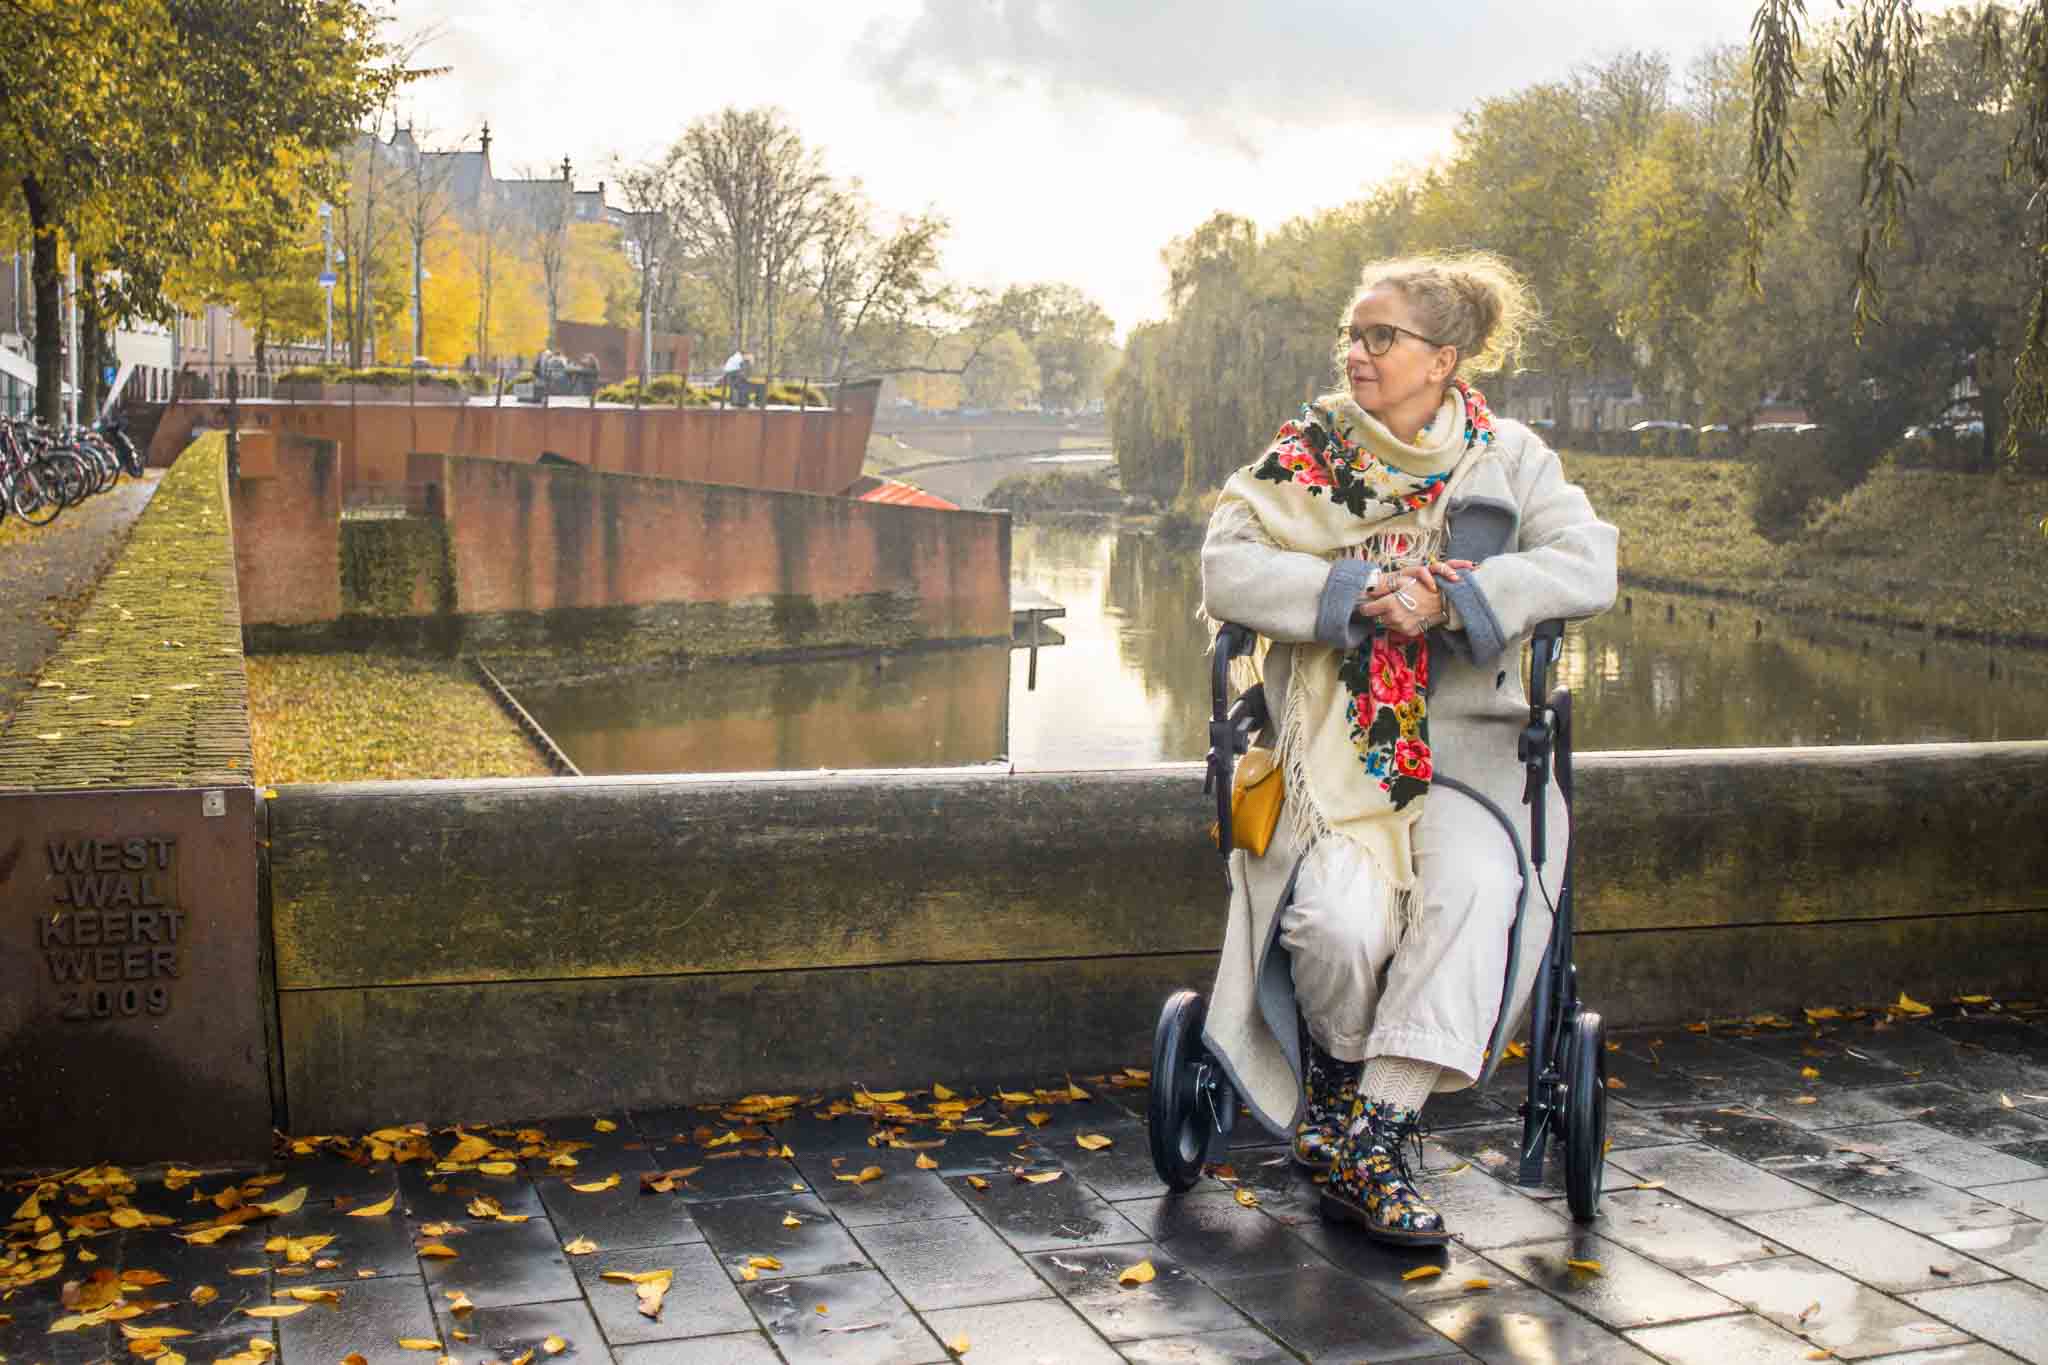 A woman rests by sitting on a 'Rollz Motion' walker with a canal in the background